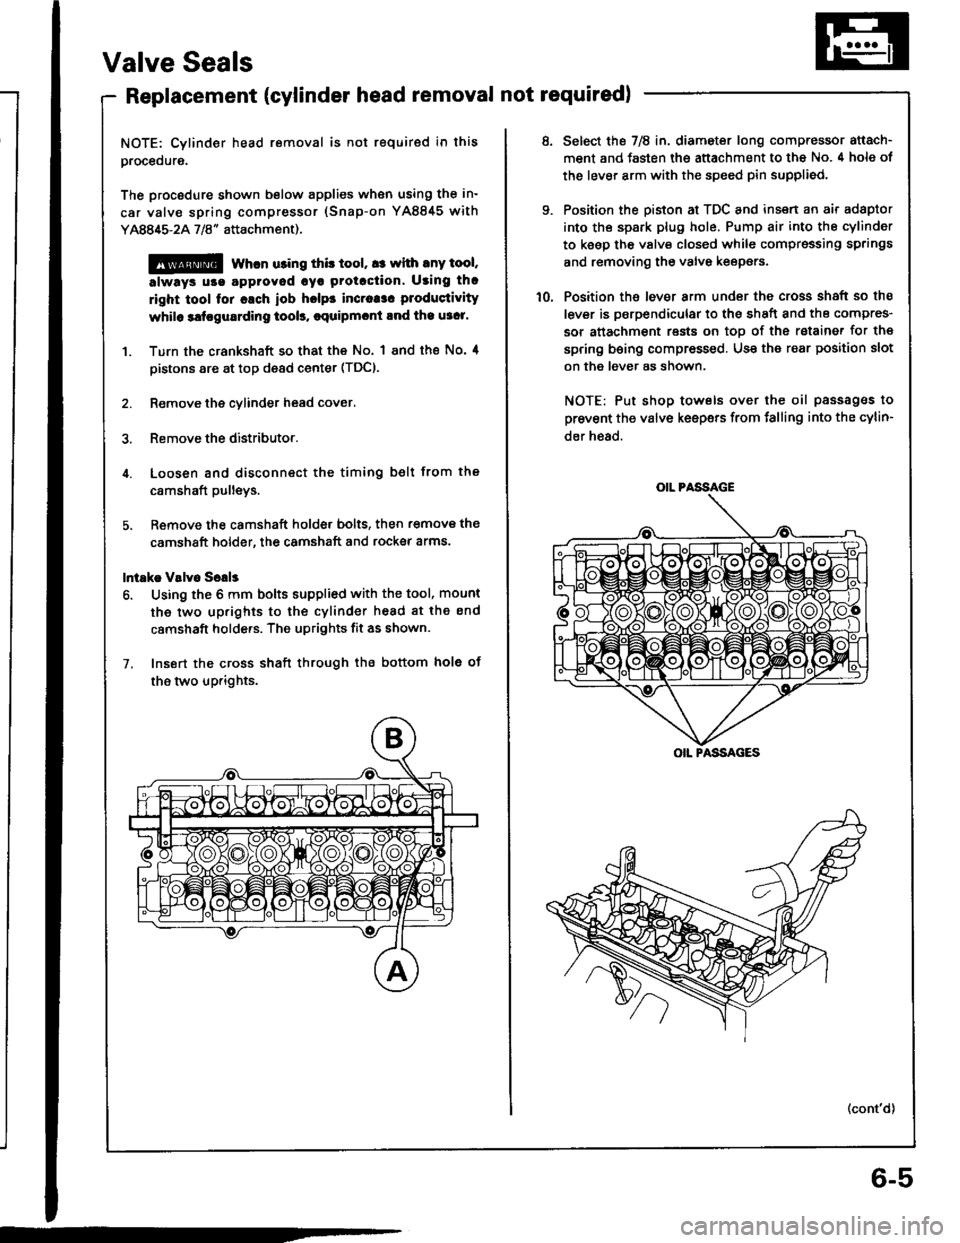 HONDA INTEGRA 1994 4.G Workshop Manual Valve Seals
Replacement (cylinder head removal not requiredl
NOTE: Cylinder head removal is not required in this
procedure.
The procodure shown below applies when using the in-
car valve spring compre